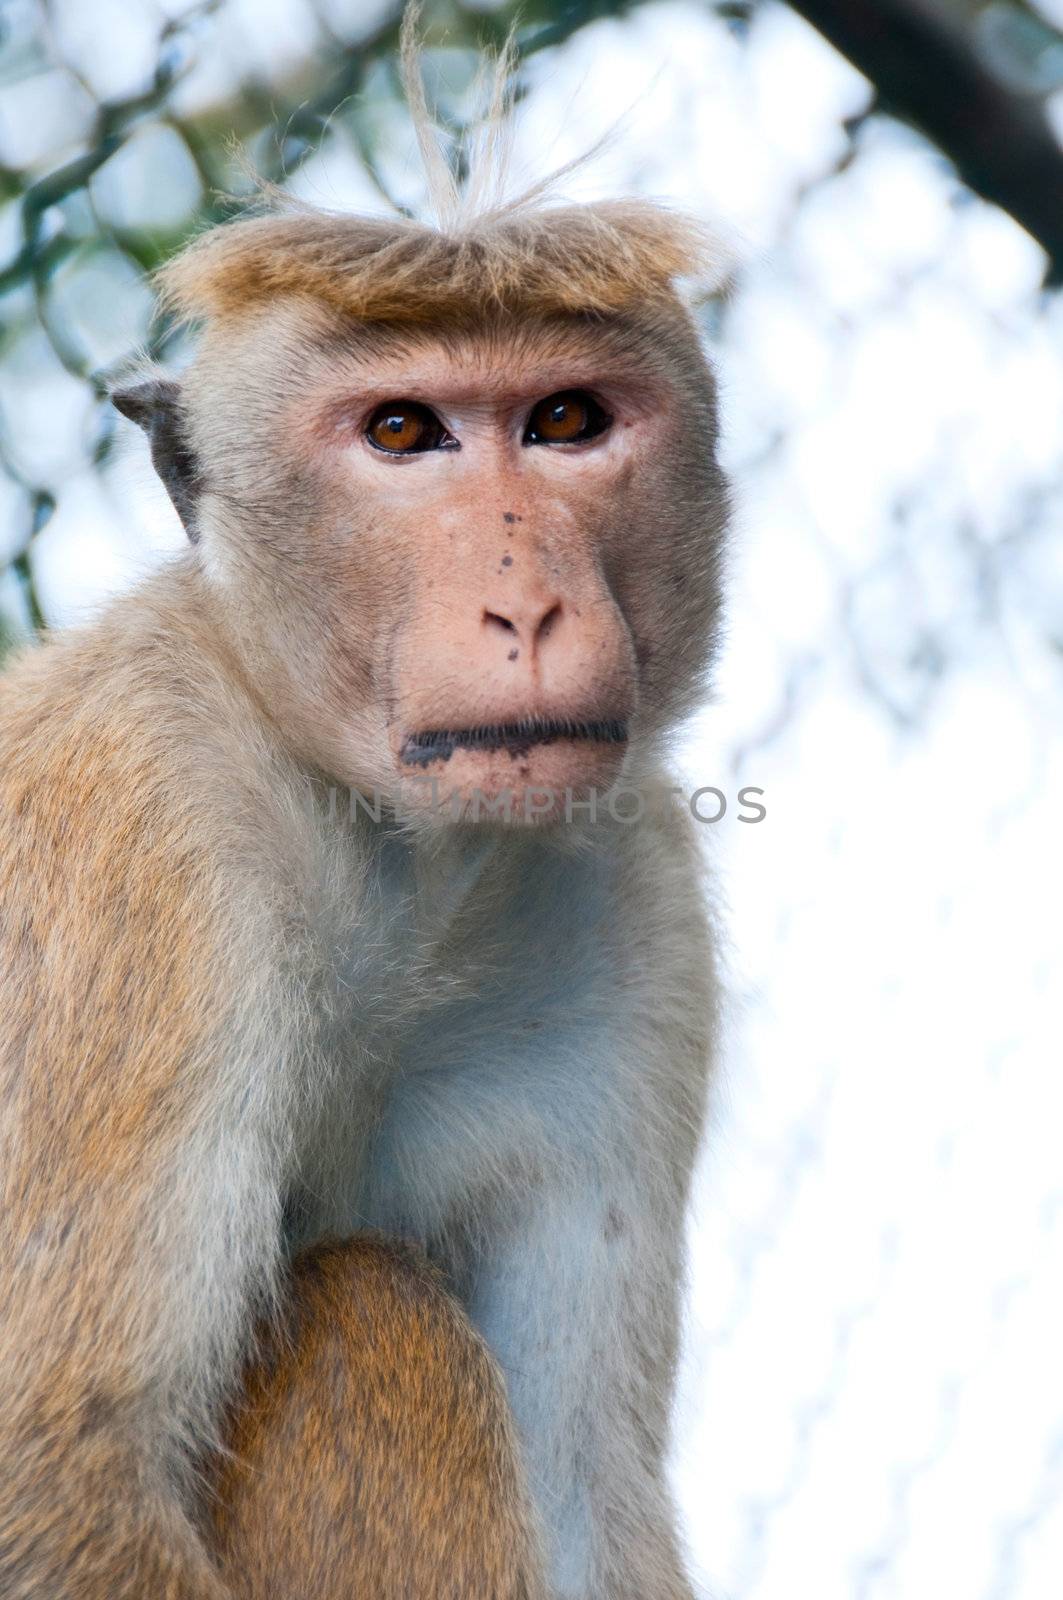 Portrait of wild smart monkey with clever and calm look. It is wild animal near a temple in Sri Lanka